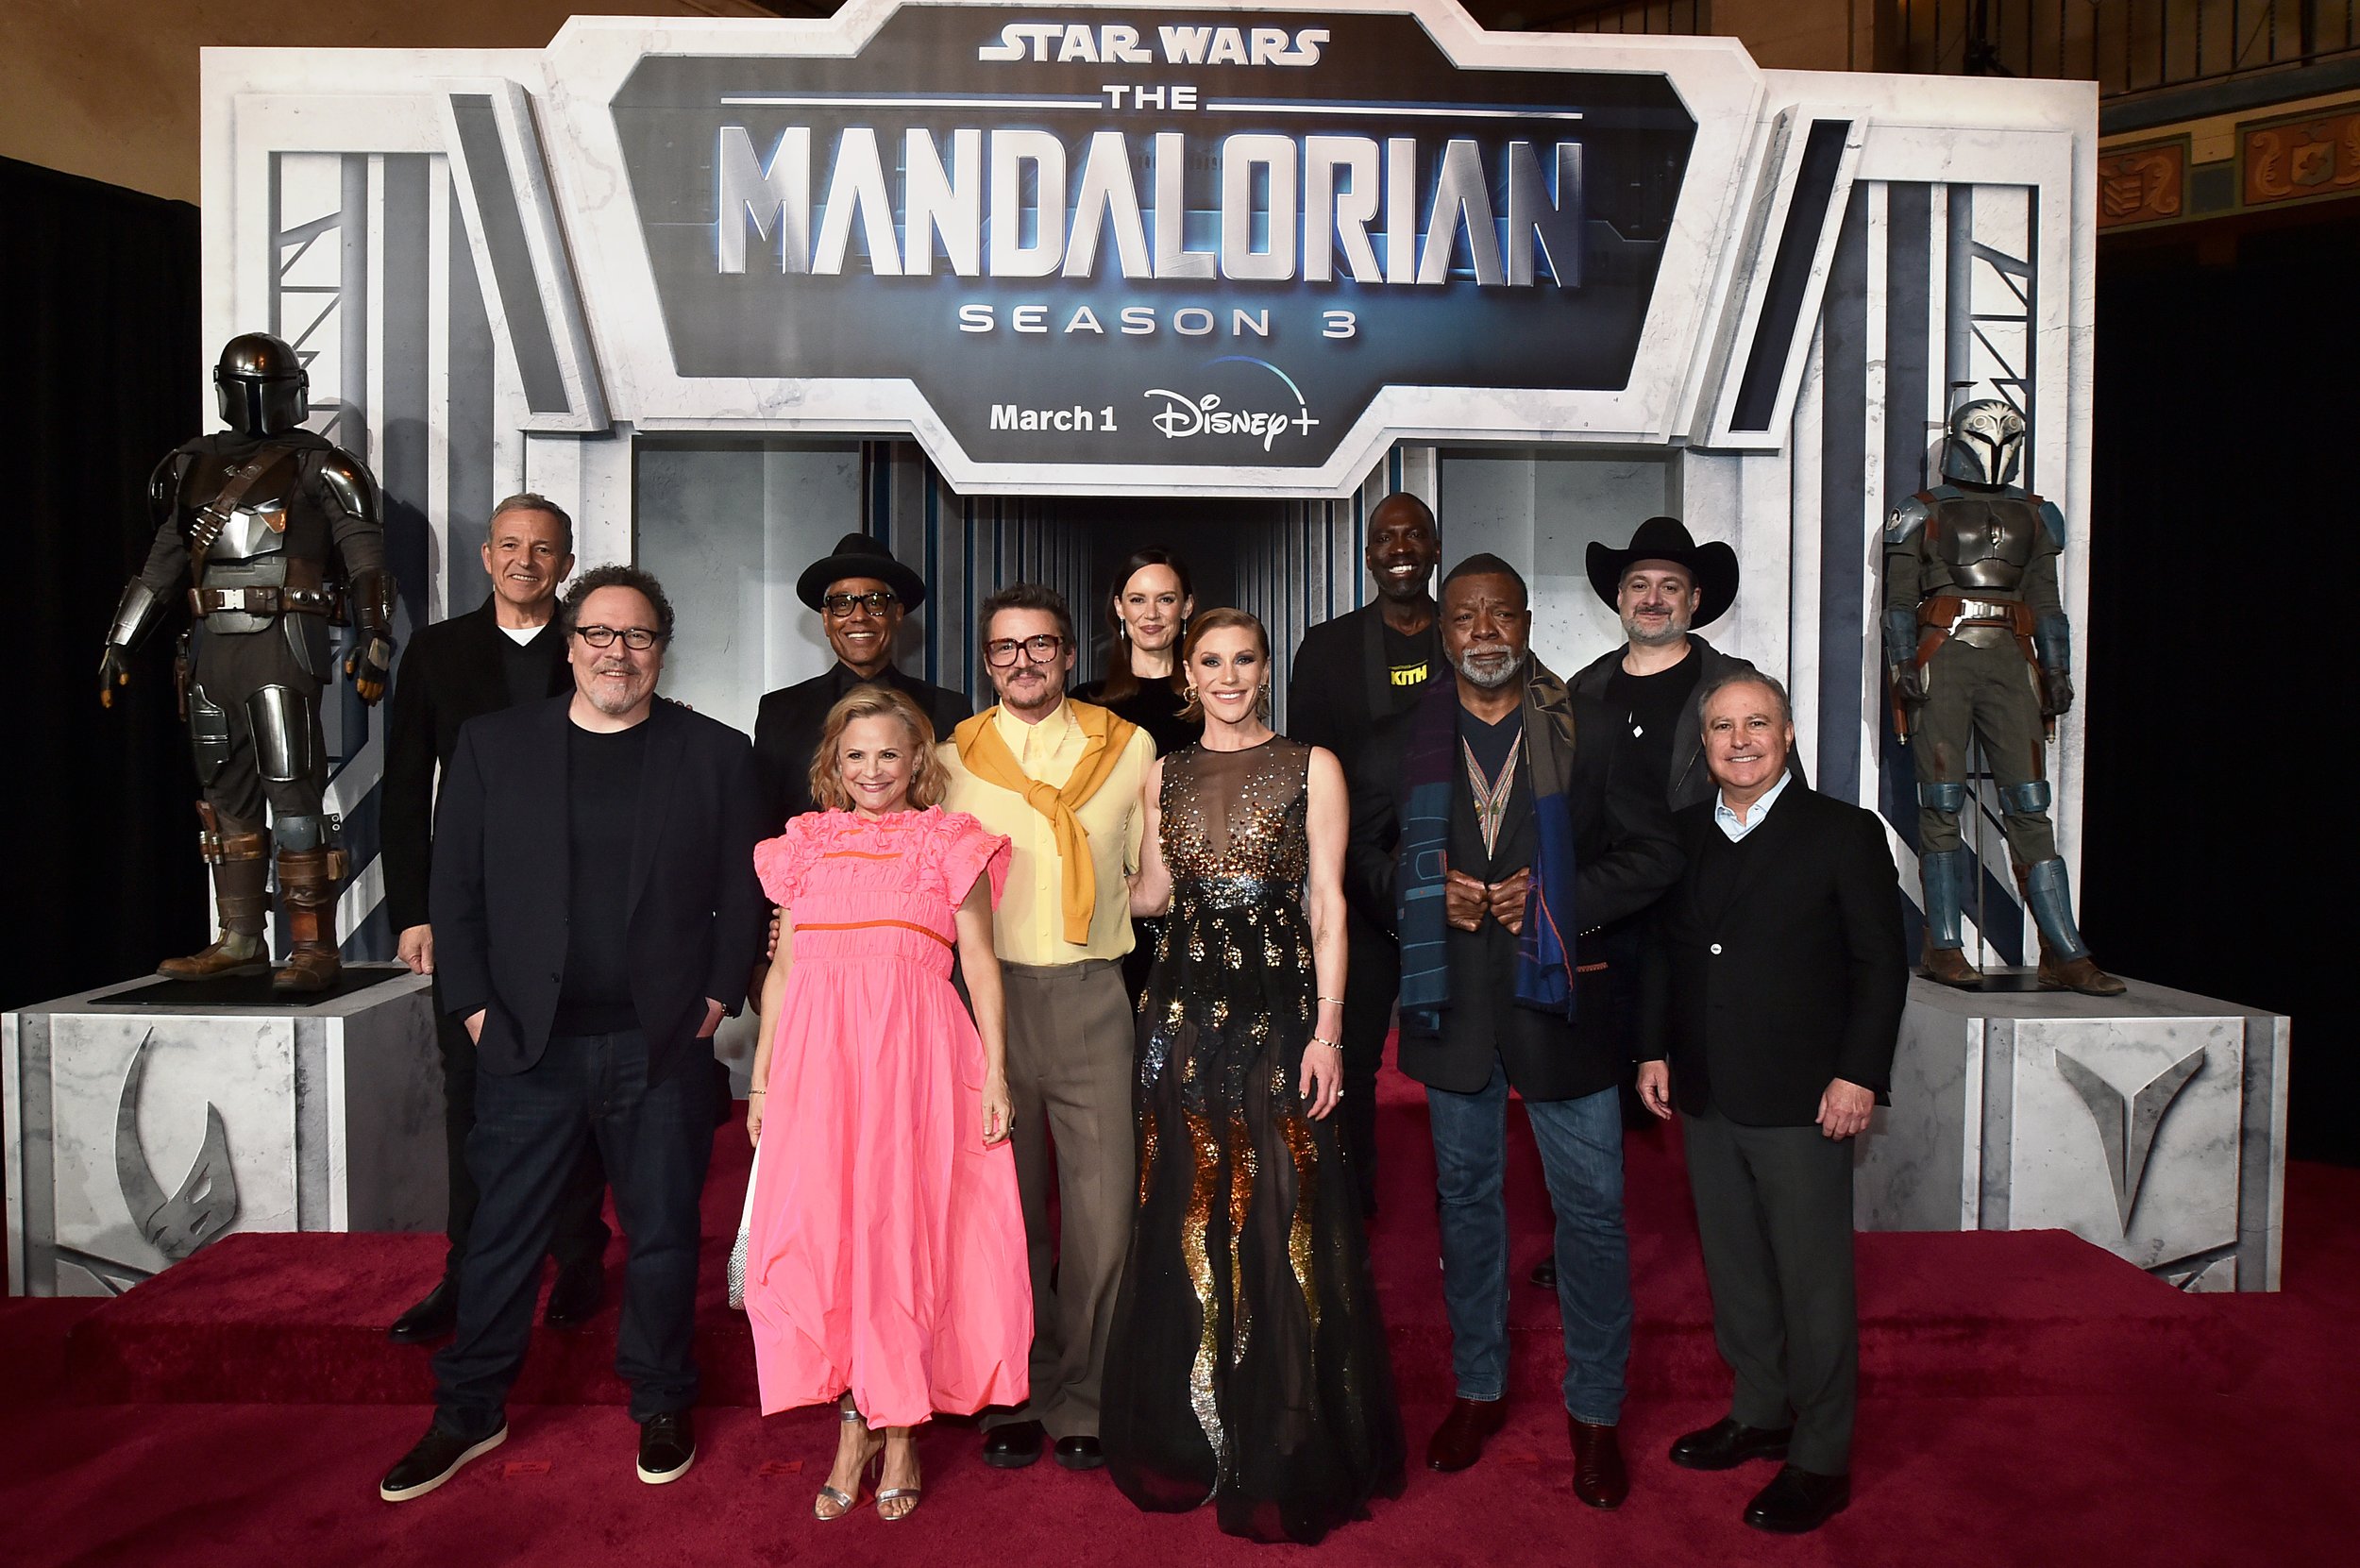 The Mandalorian season 3 release date, cast, and more